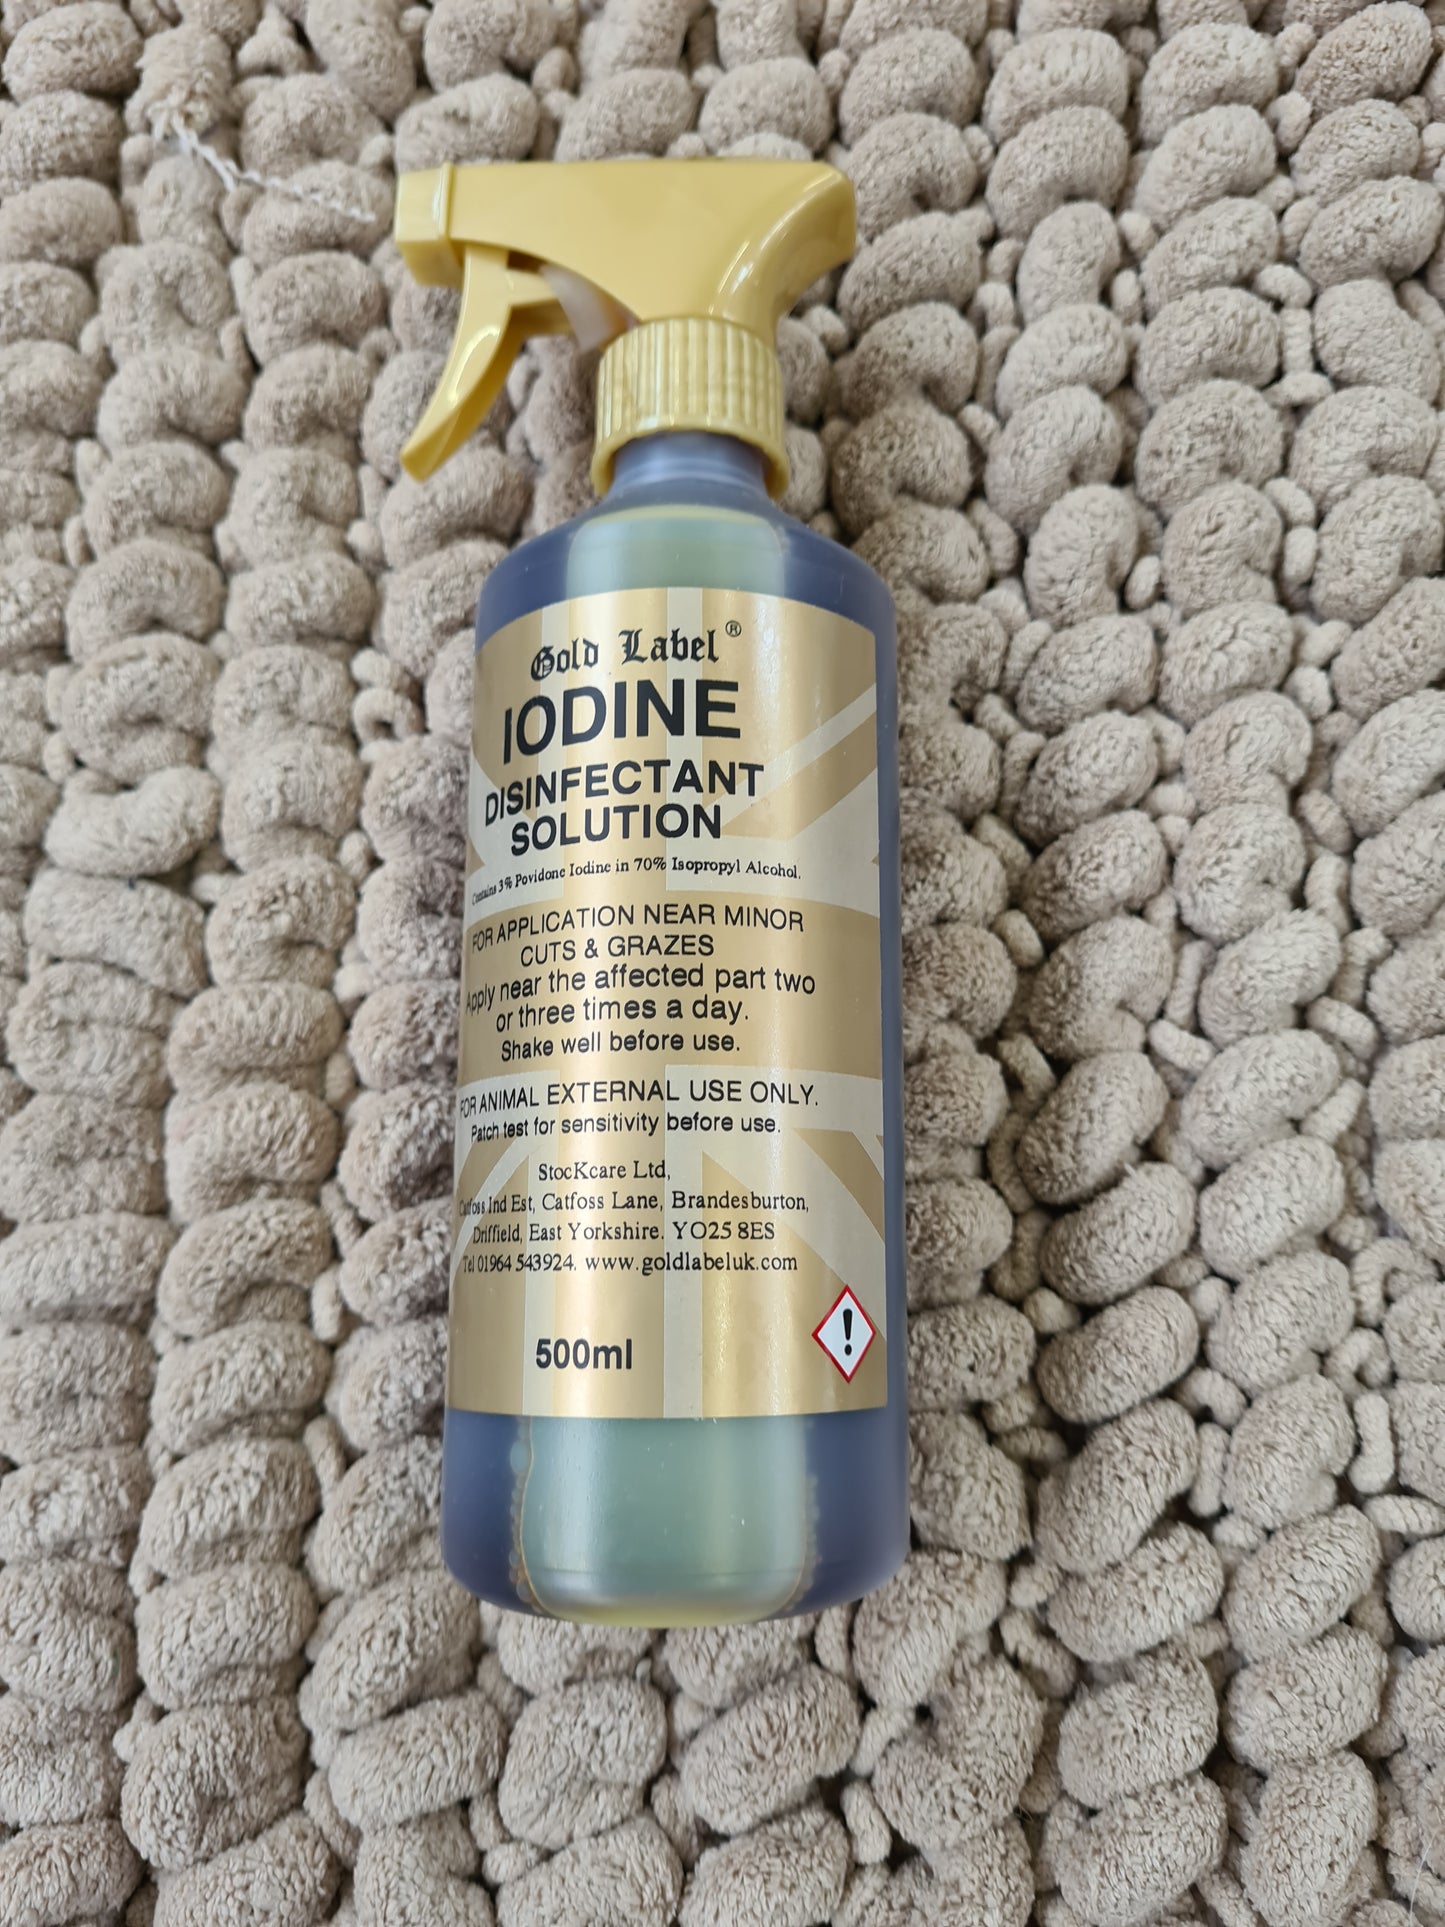 New gold label iodine disinfectant solution FREE POSTAGE☆